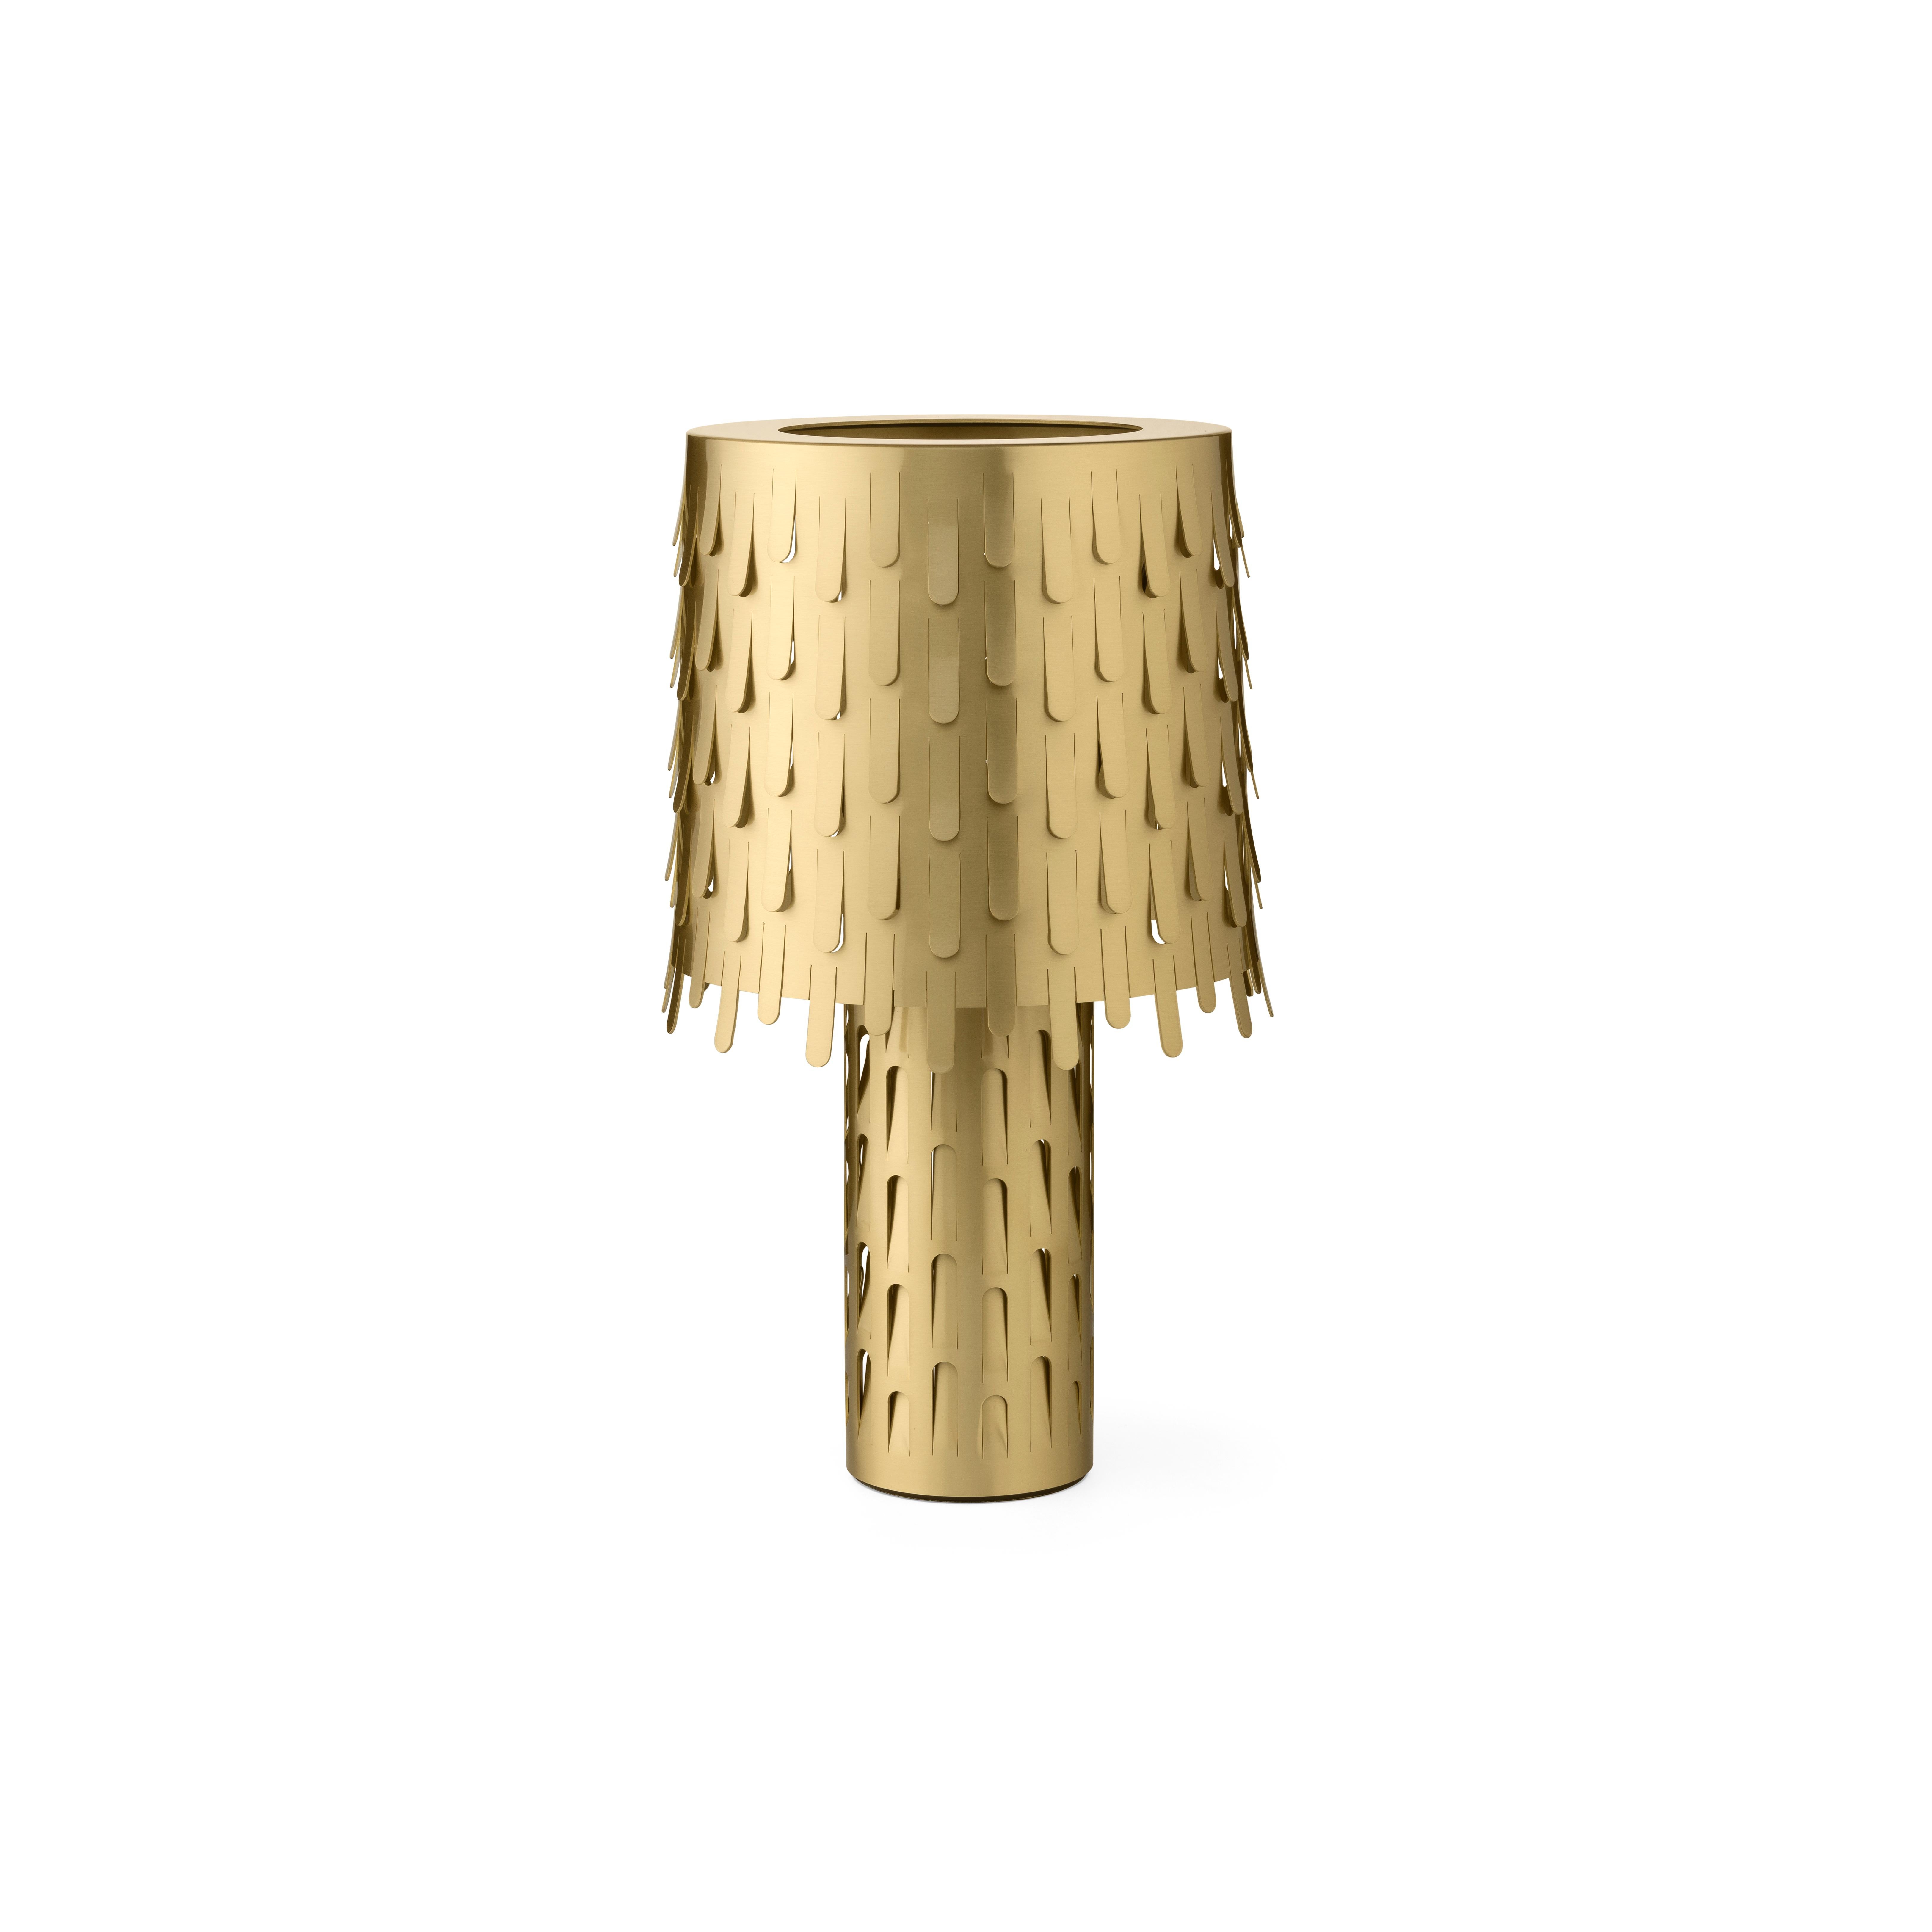 The lamp is made of polished brass, synonymous of elegance and preciousness. It is composed of two overlapping cylinders, the large stem supports an important lampshade decorated with a thousand leaves bent by the wind. The perforated structure and